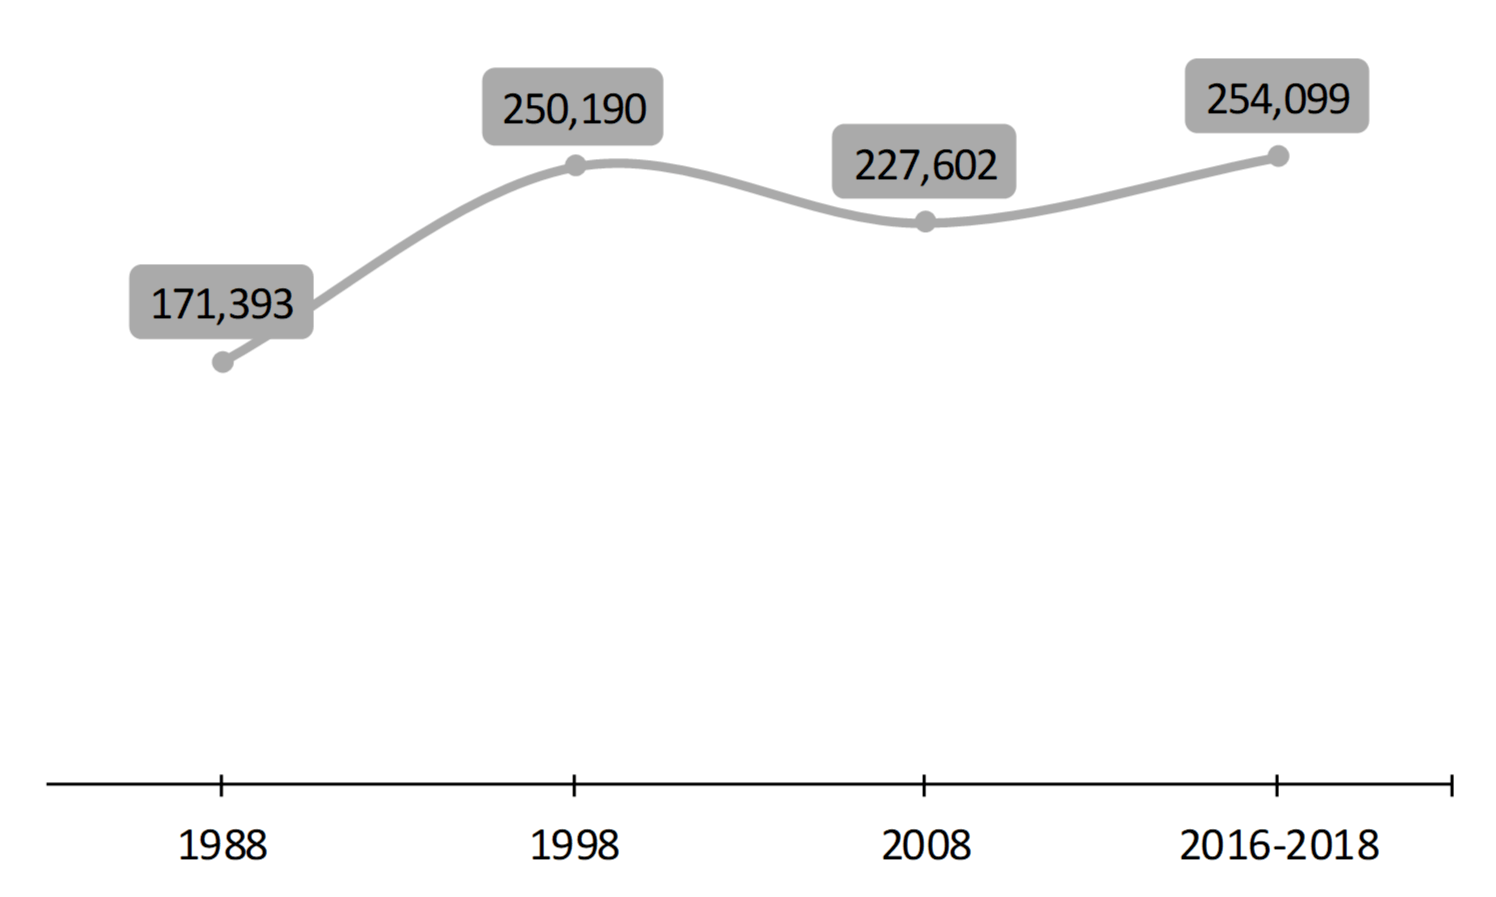 line chart showing Figure 1. Number of Foster Children, 1988-2018